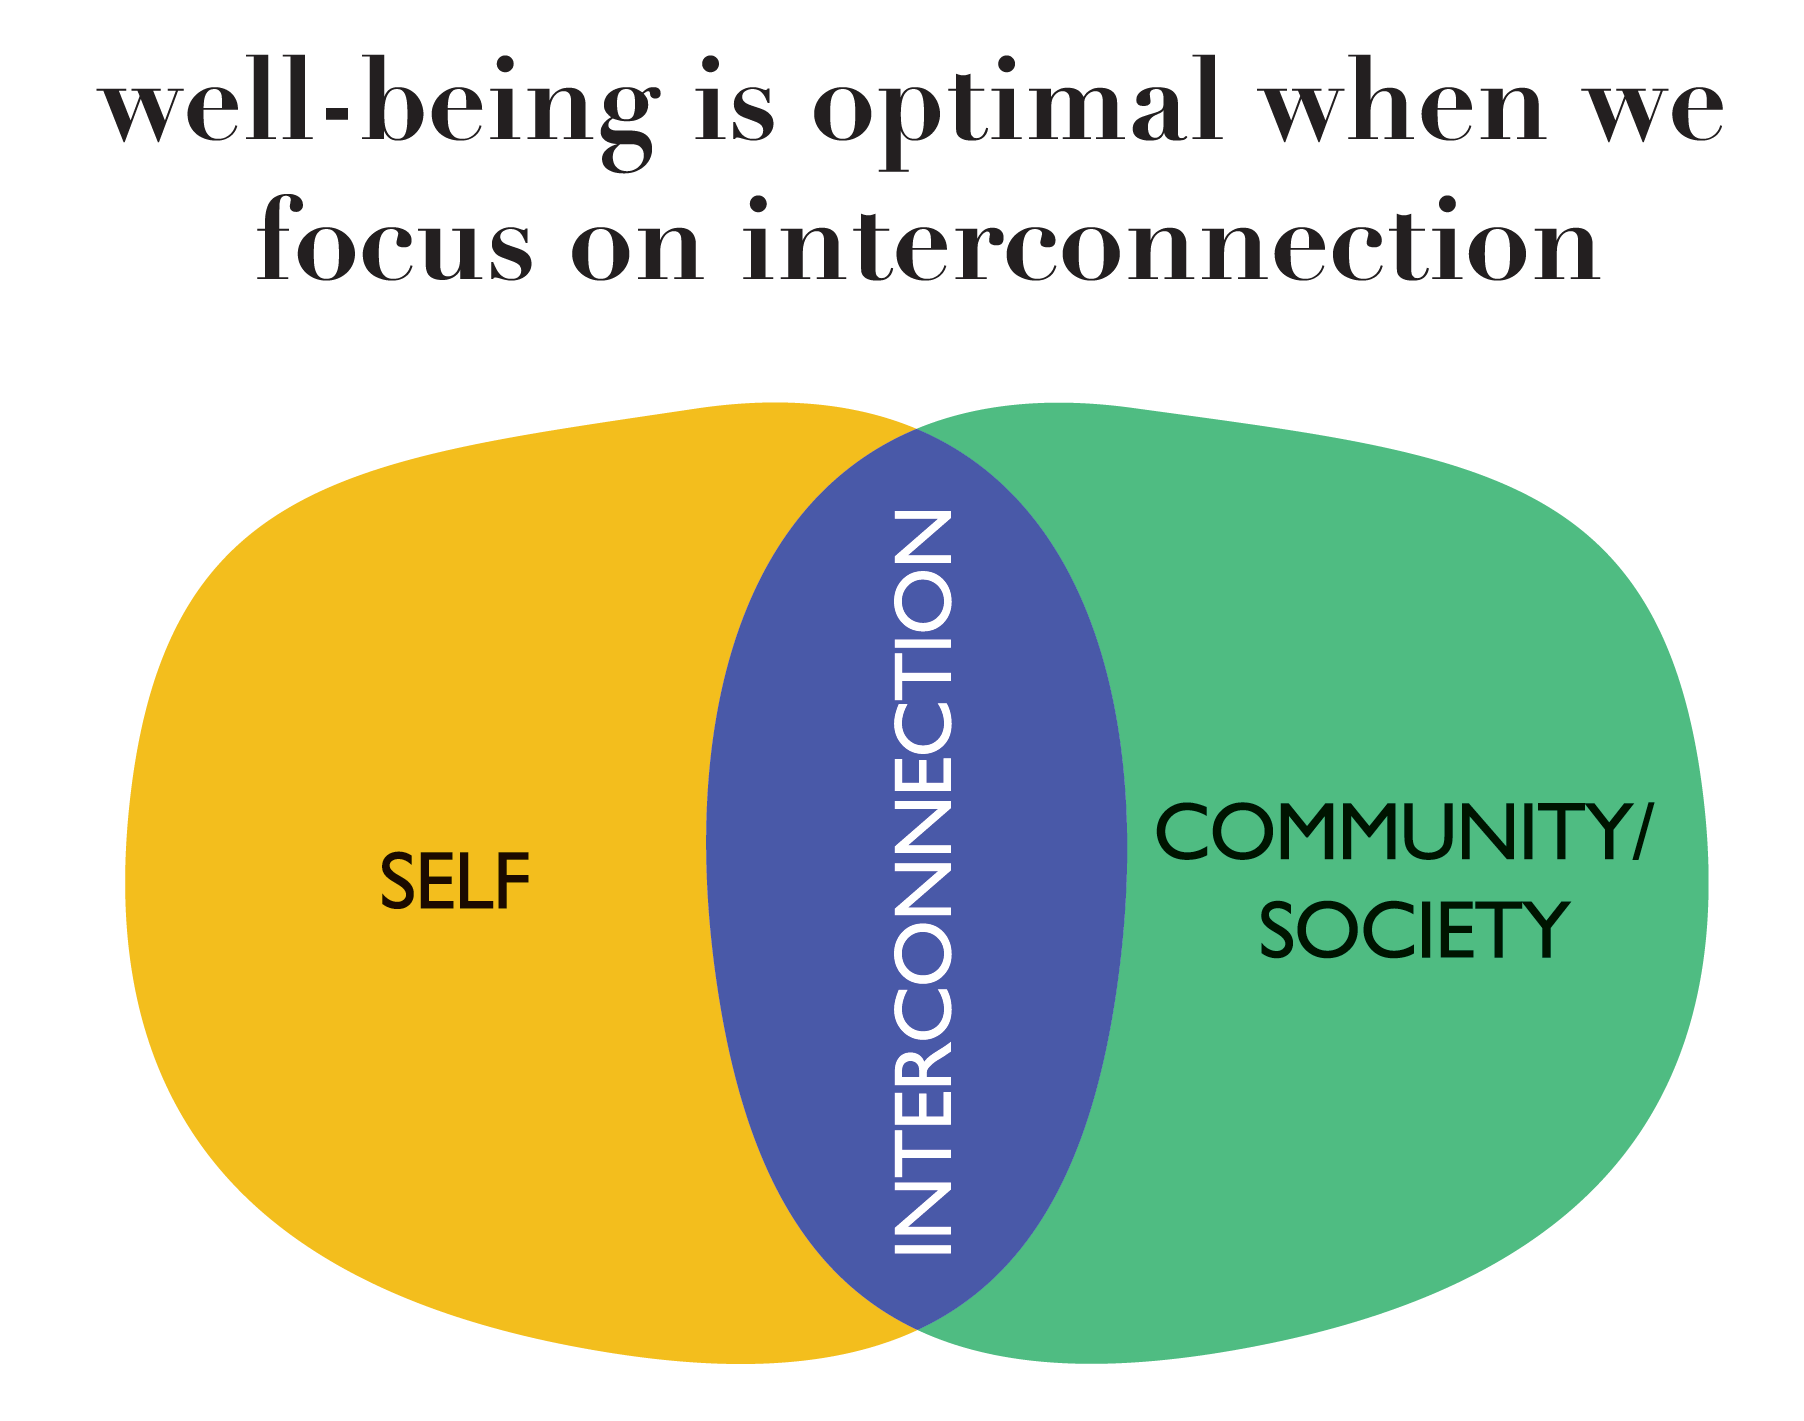 well-being is optimal when we focus on interconnection. Self and community/society overlap at interconnection